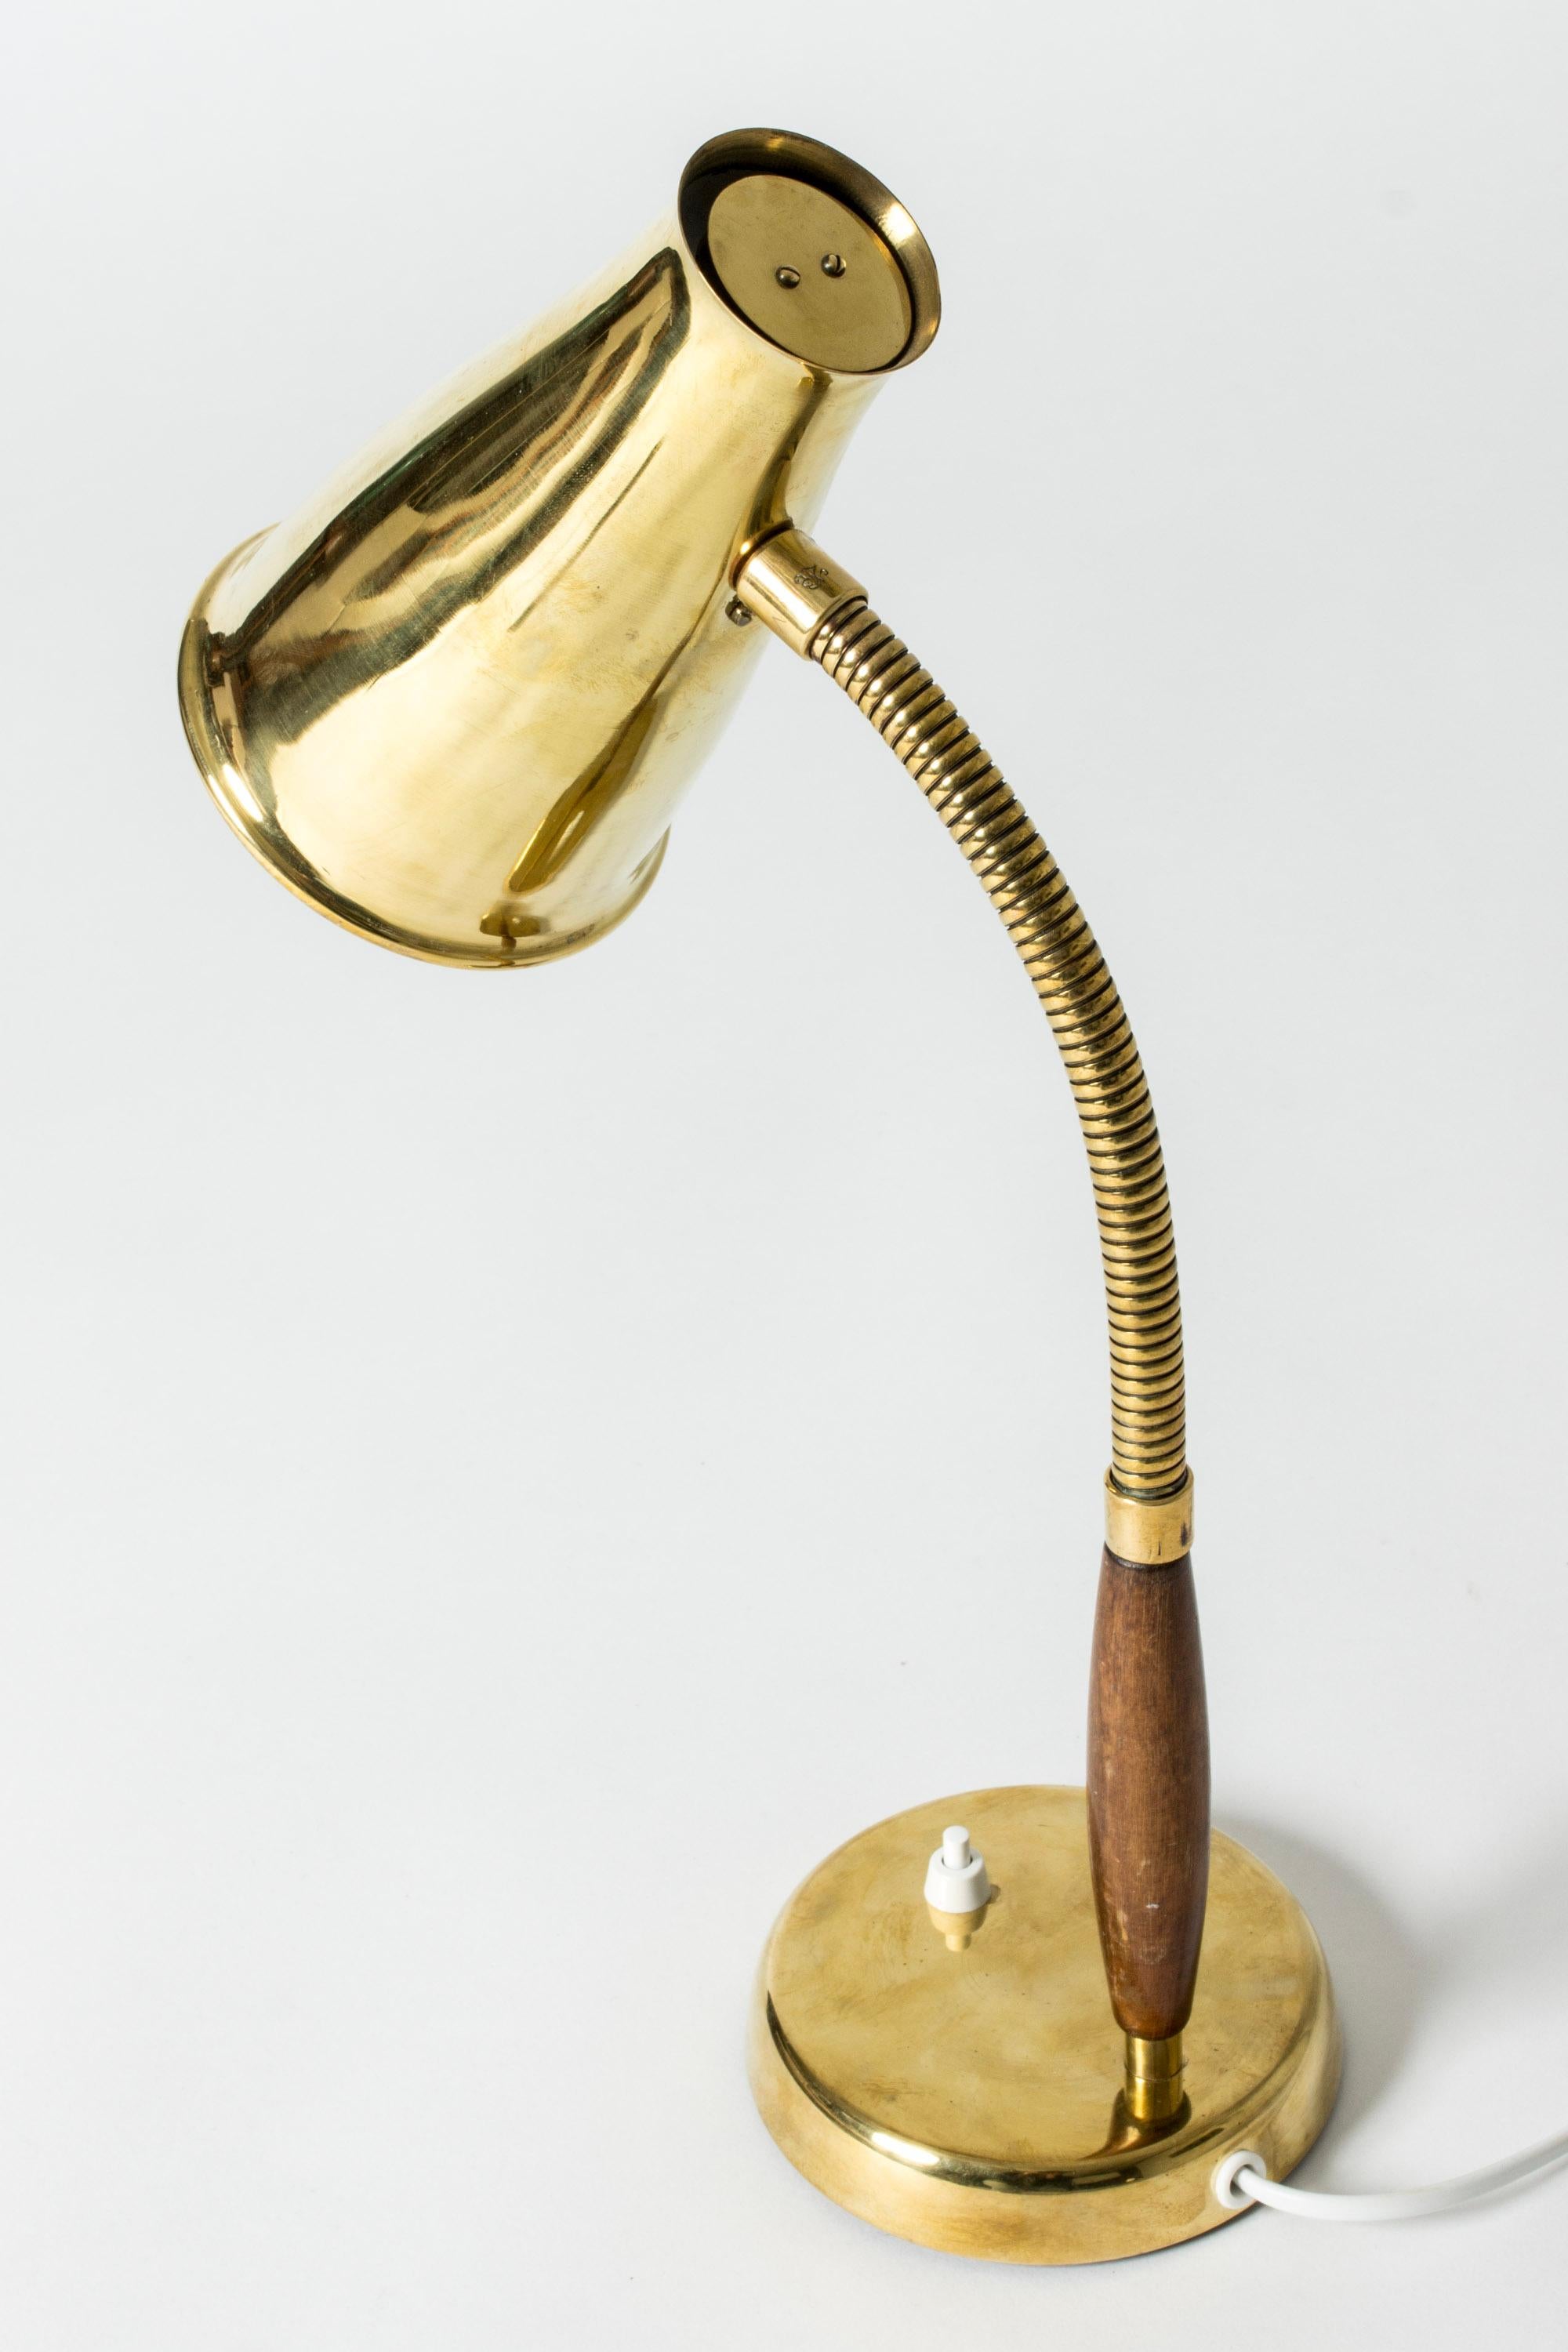 Elegant brass table lamp from Einar Bäckström, with a teak handle. Flexible neck and elongated shade.